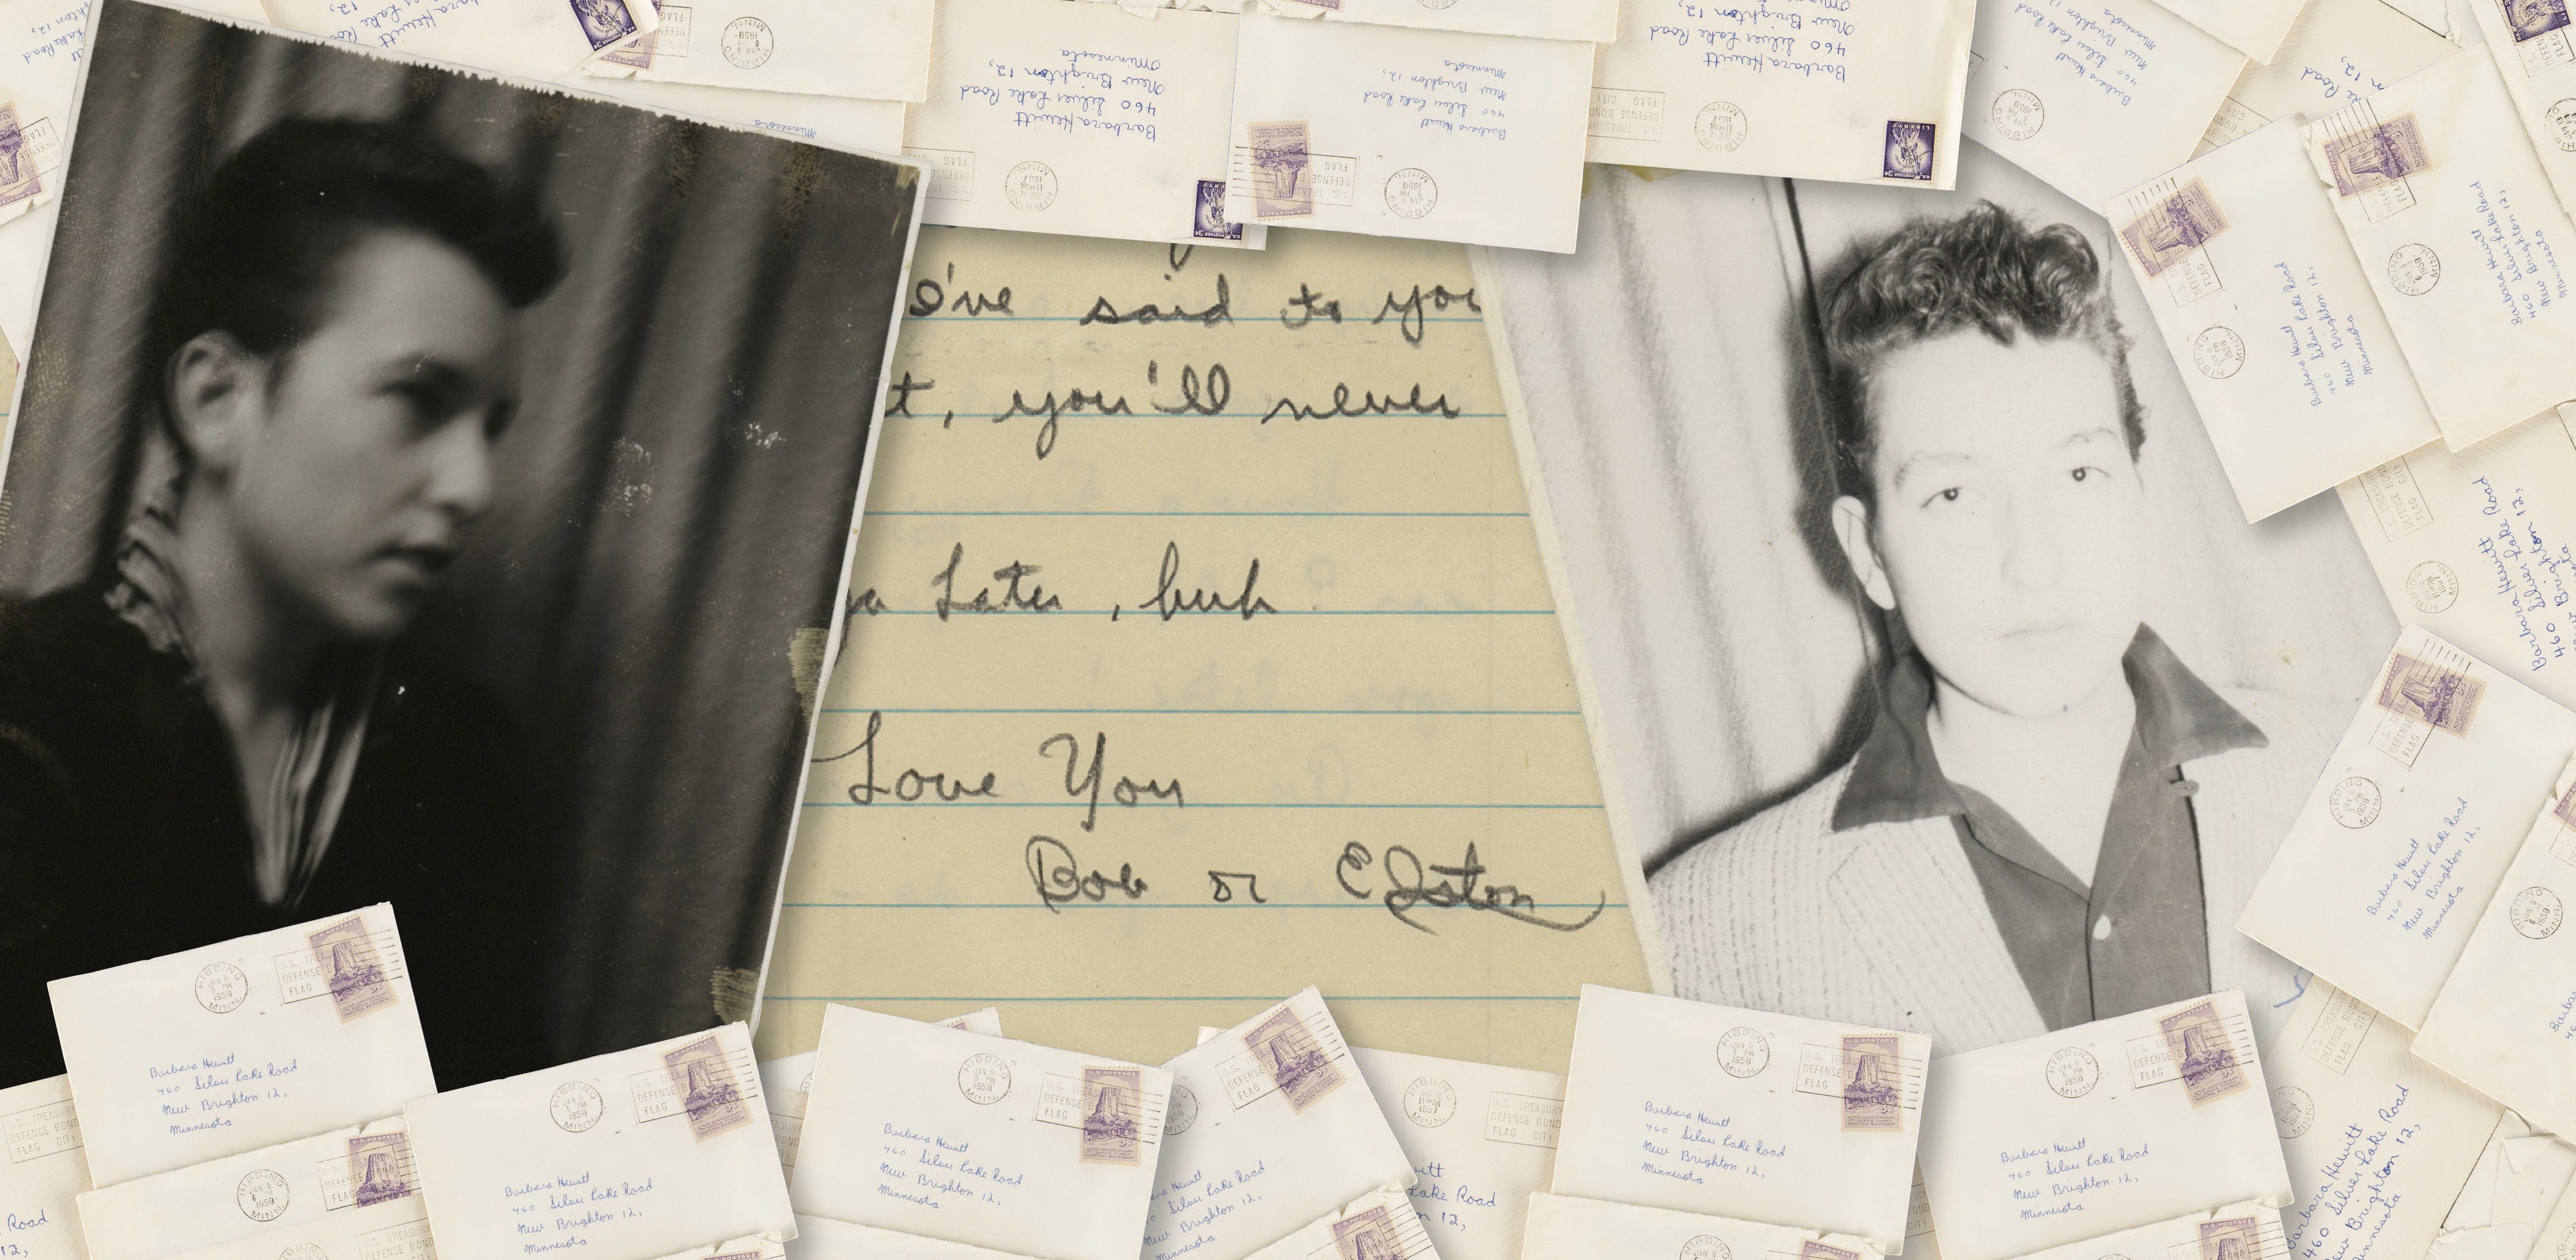 Collection of Love Letters Written by Bob Dylan Sold for $670,000